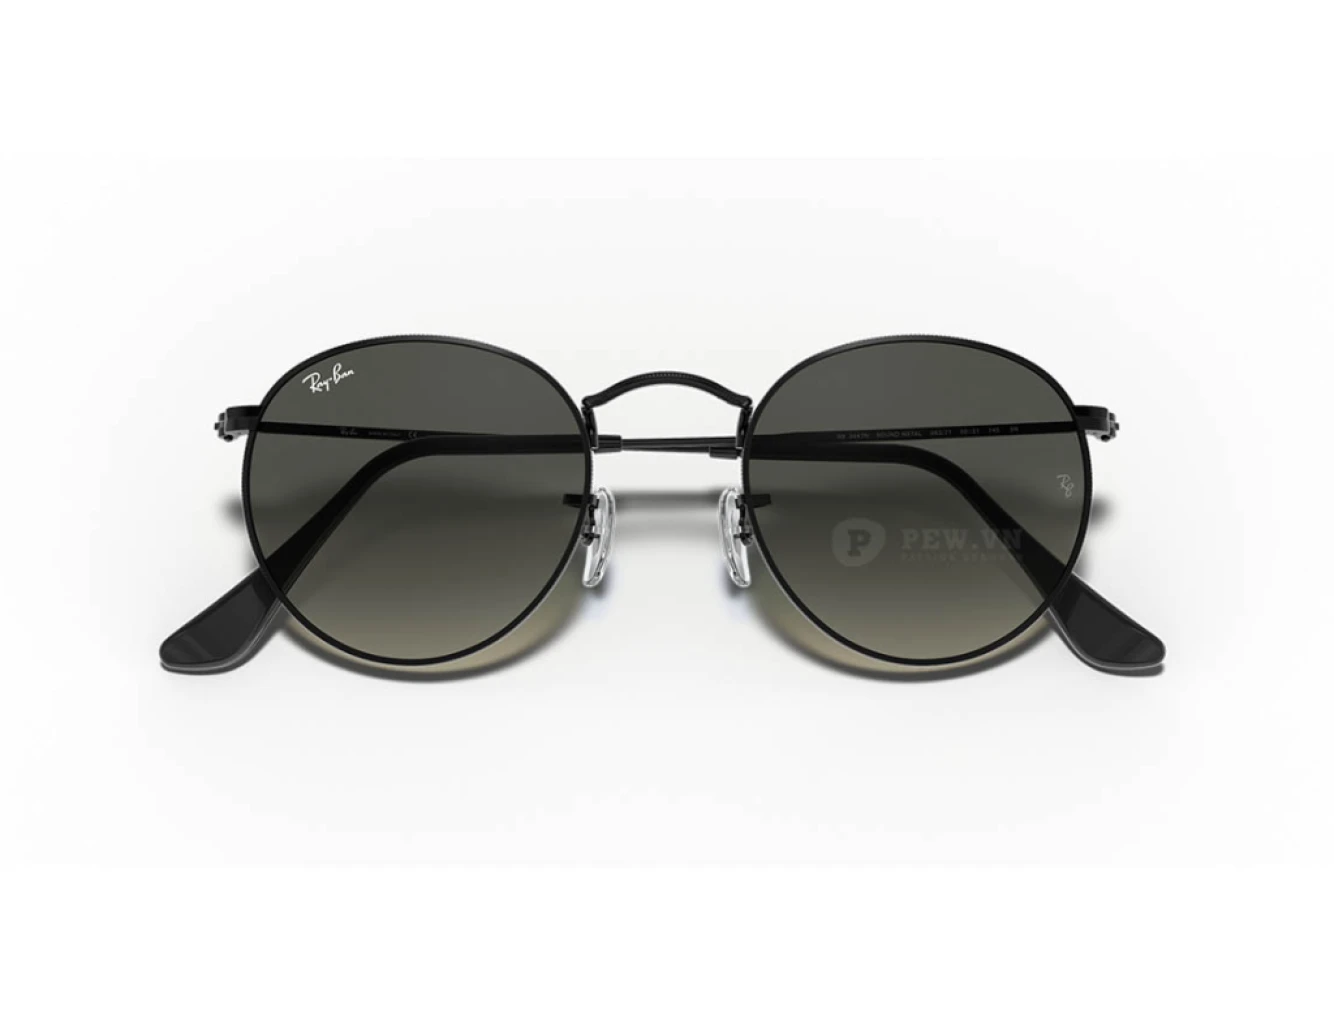 Ray-Ban Round RB3447N-002/71(53)